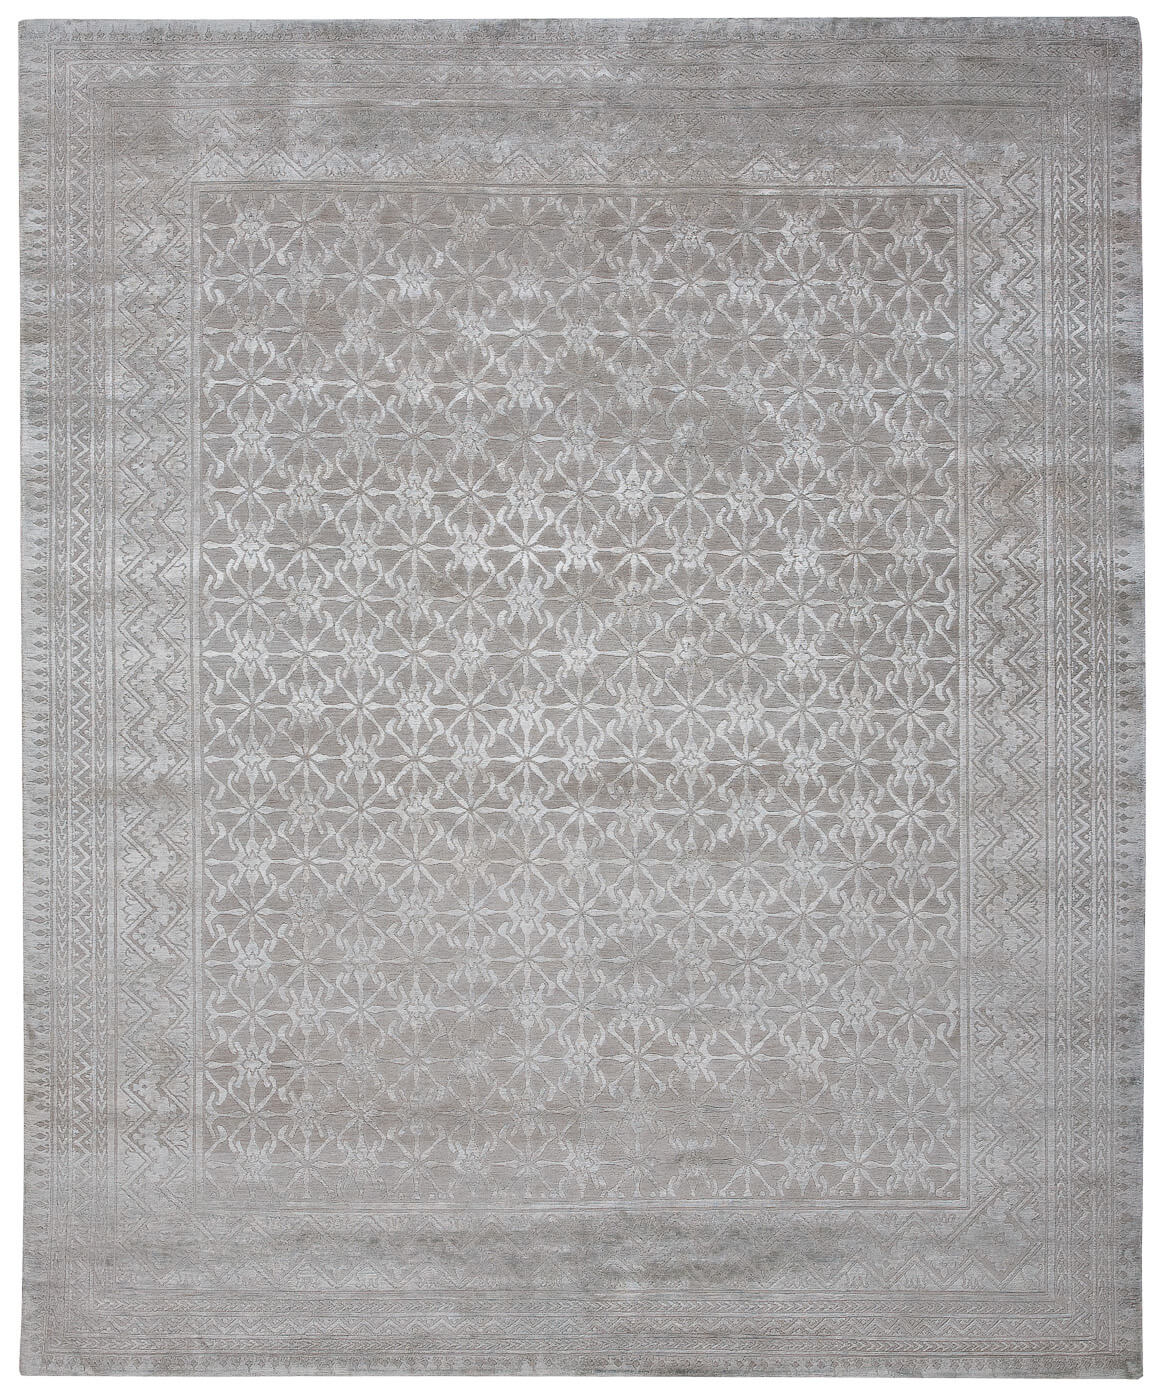 Hand-Woven Blueberry Grey 3 Rug